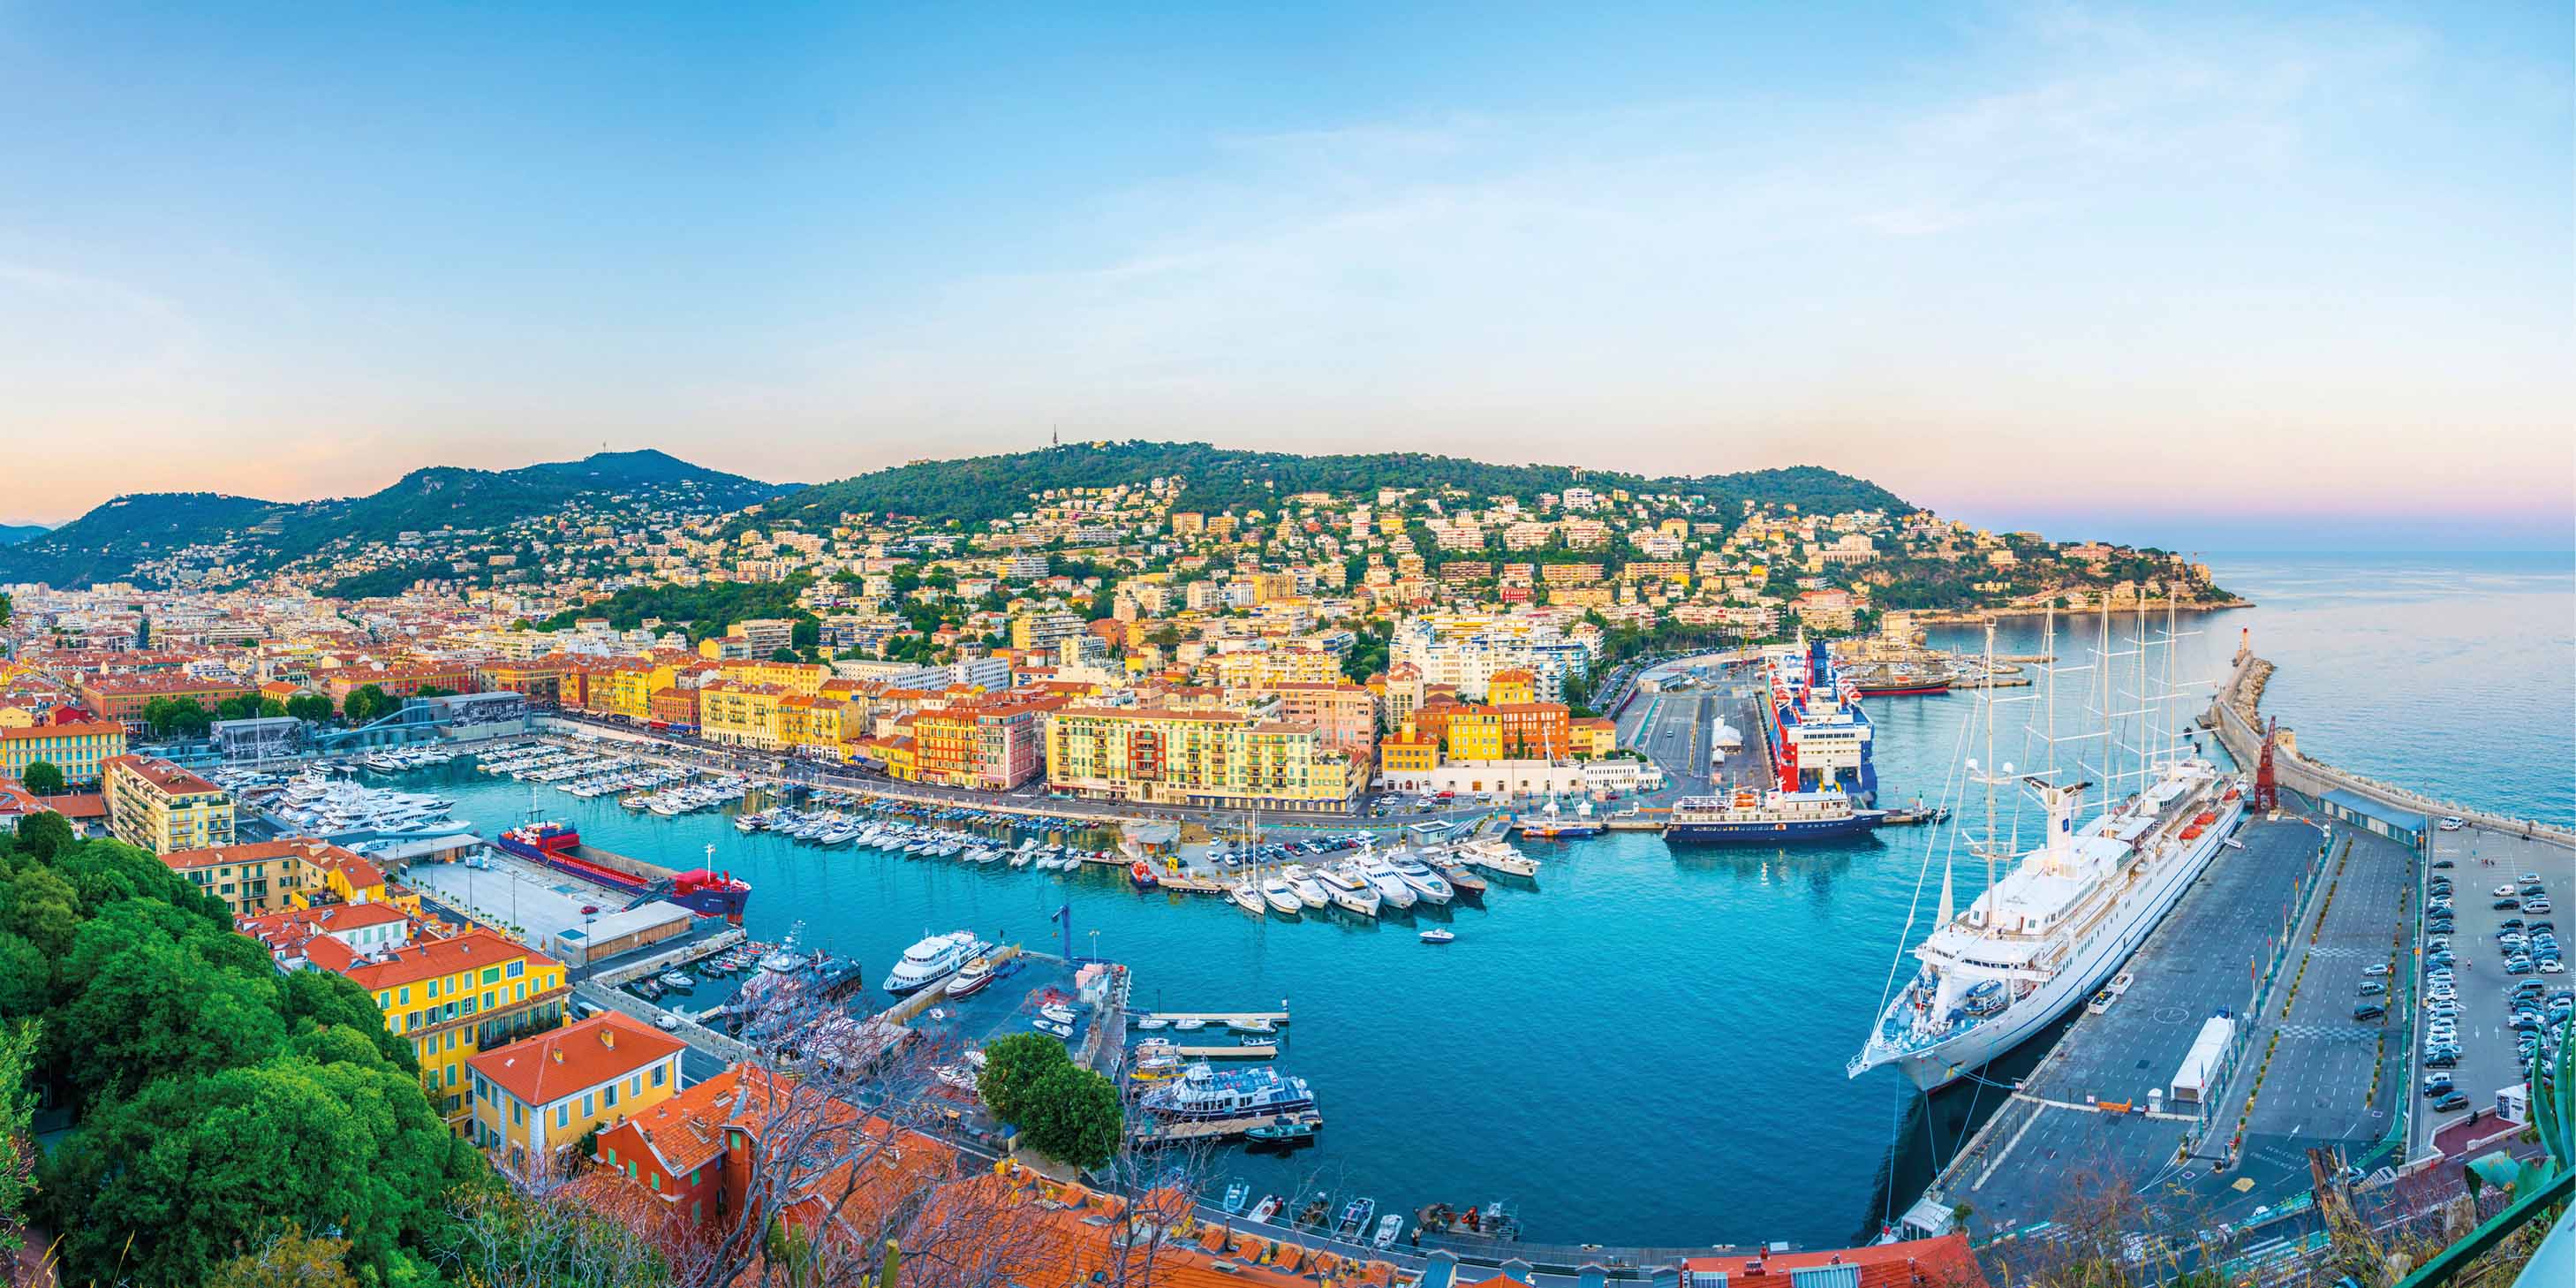 A view of Nice, France with colourful buildings and the Mediterranean Sea in the background.